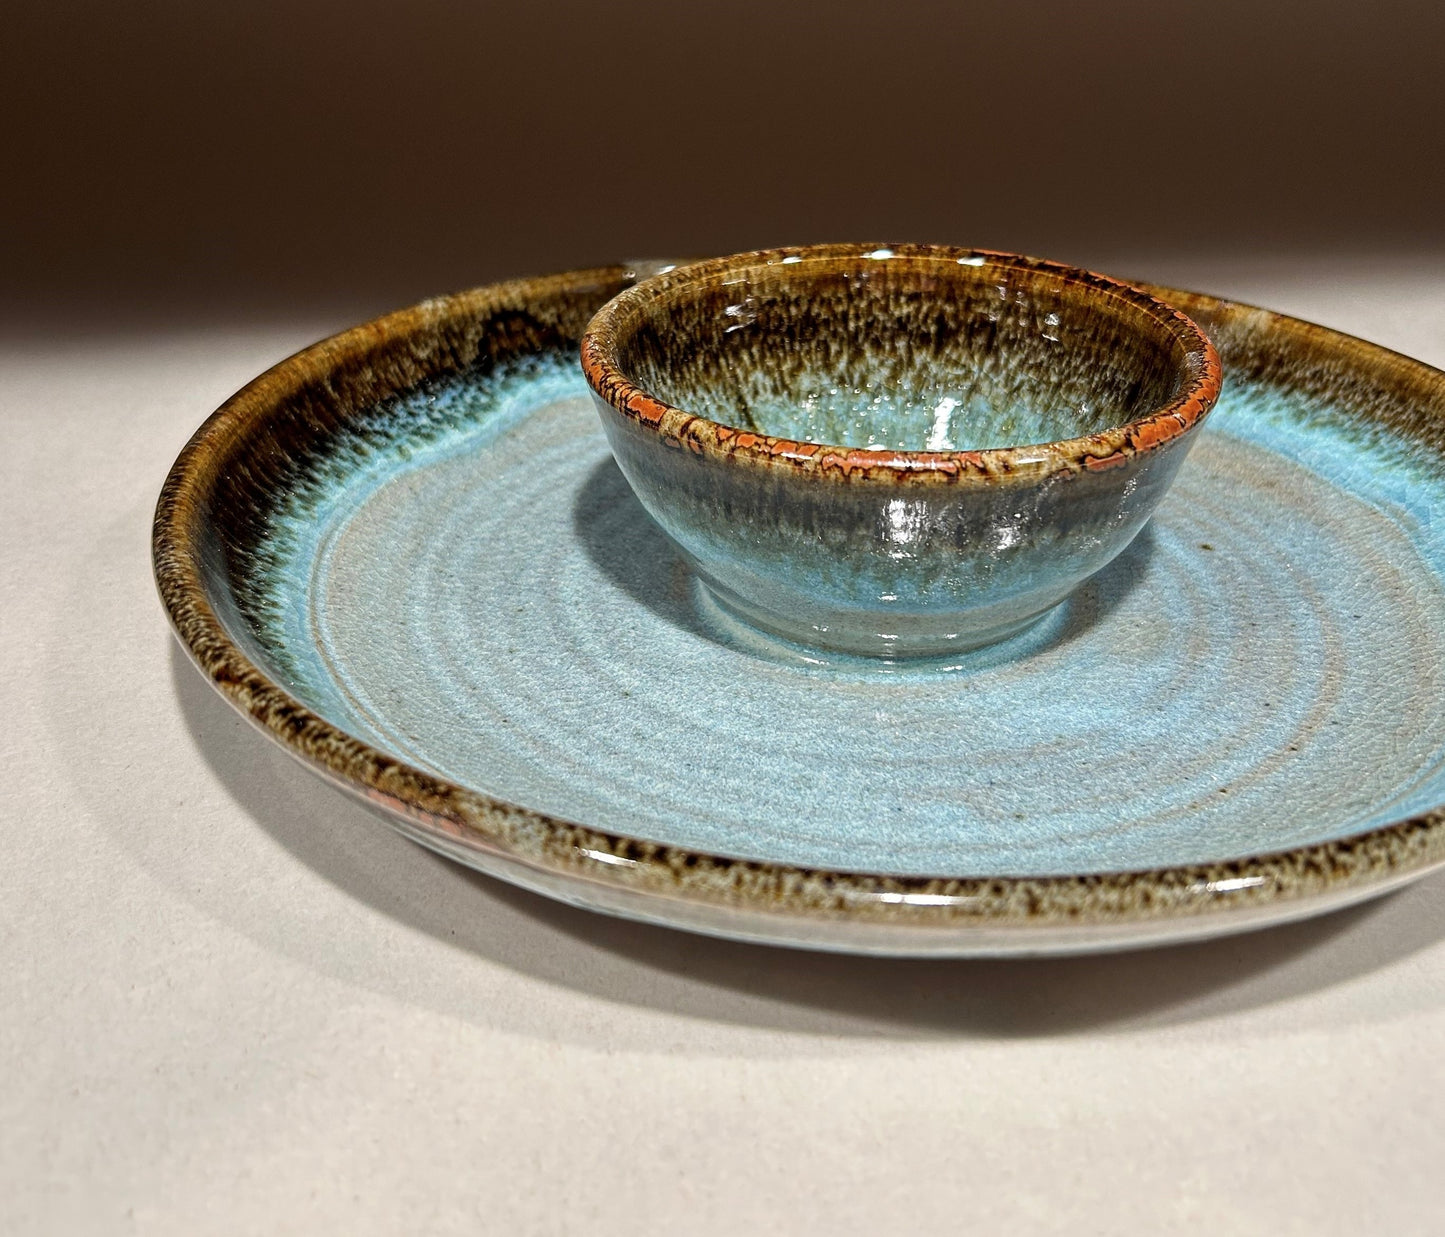 Chip-n-dip - Pottery - Serving ware